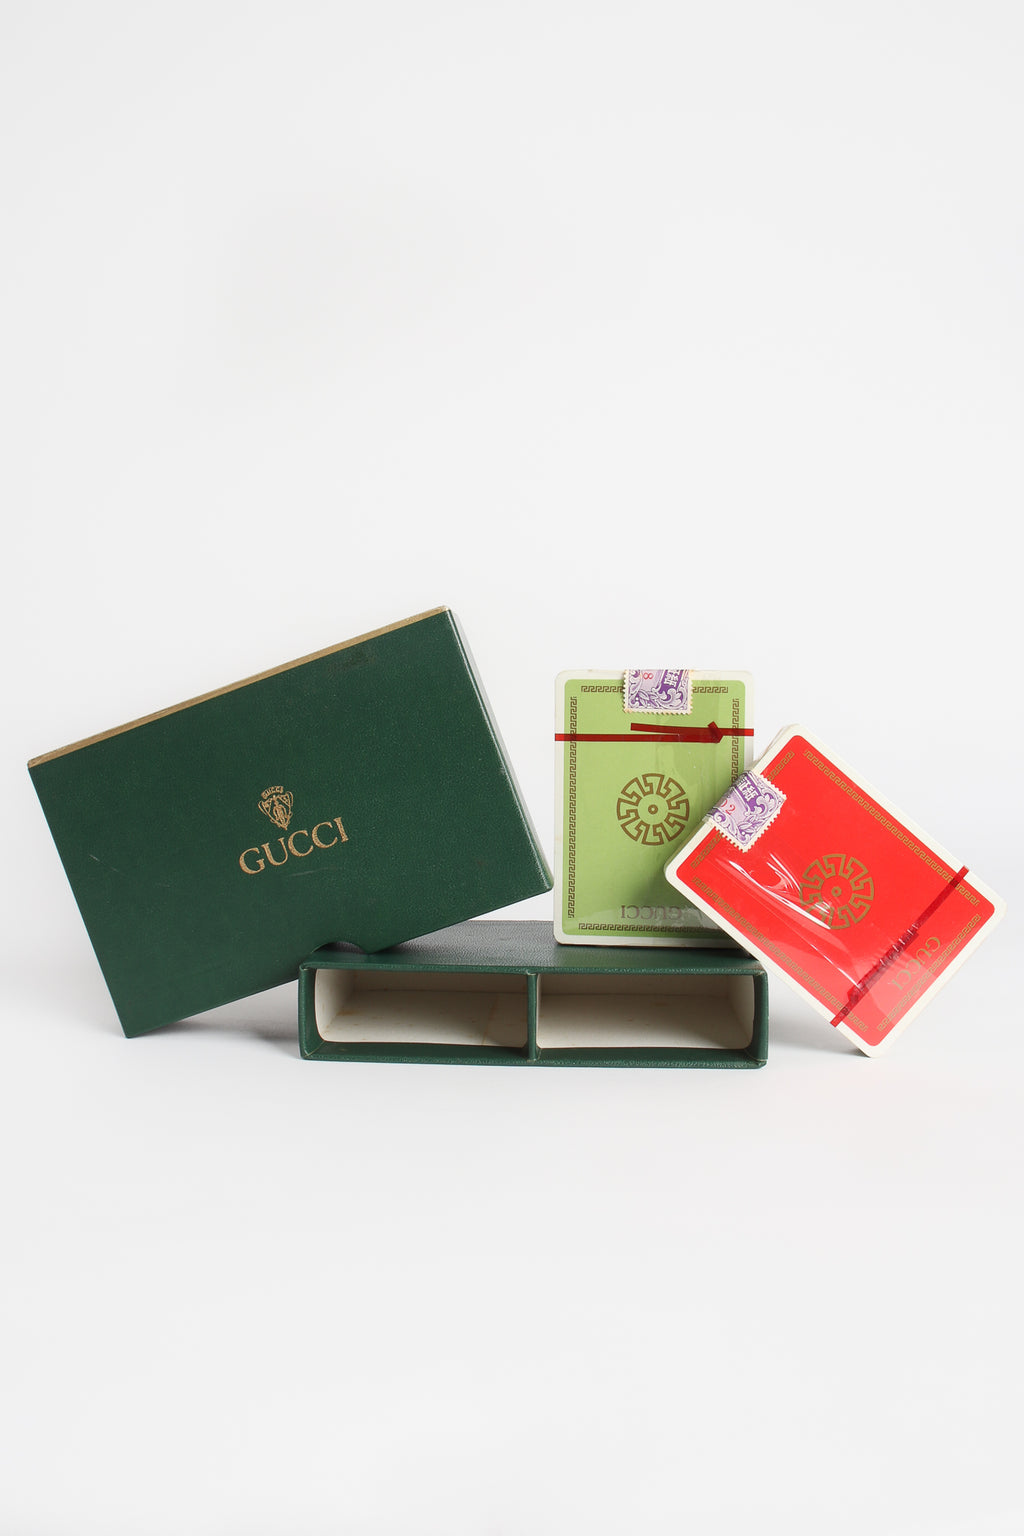 Gucci Playing Cards 2 deck With Box & Ribbon 1 deck New